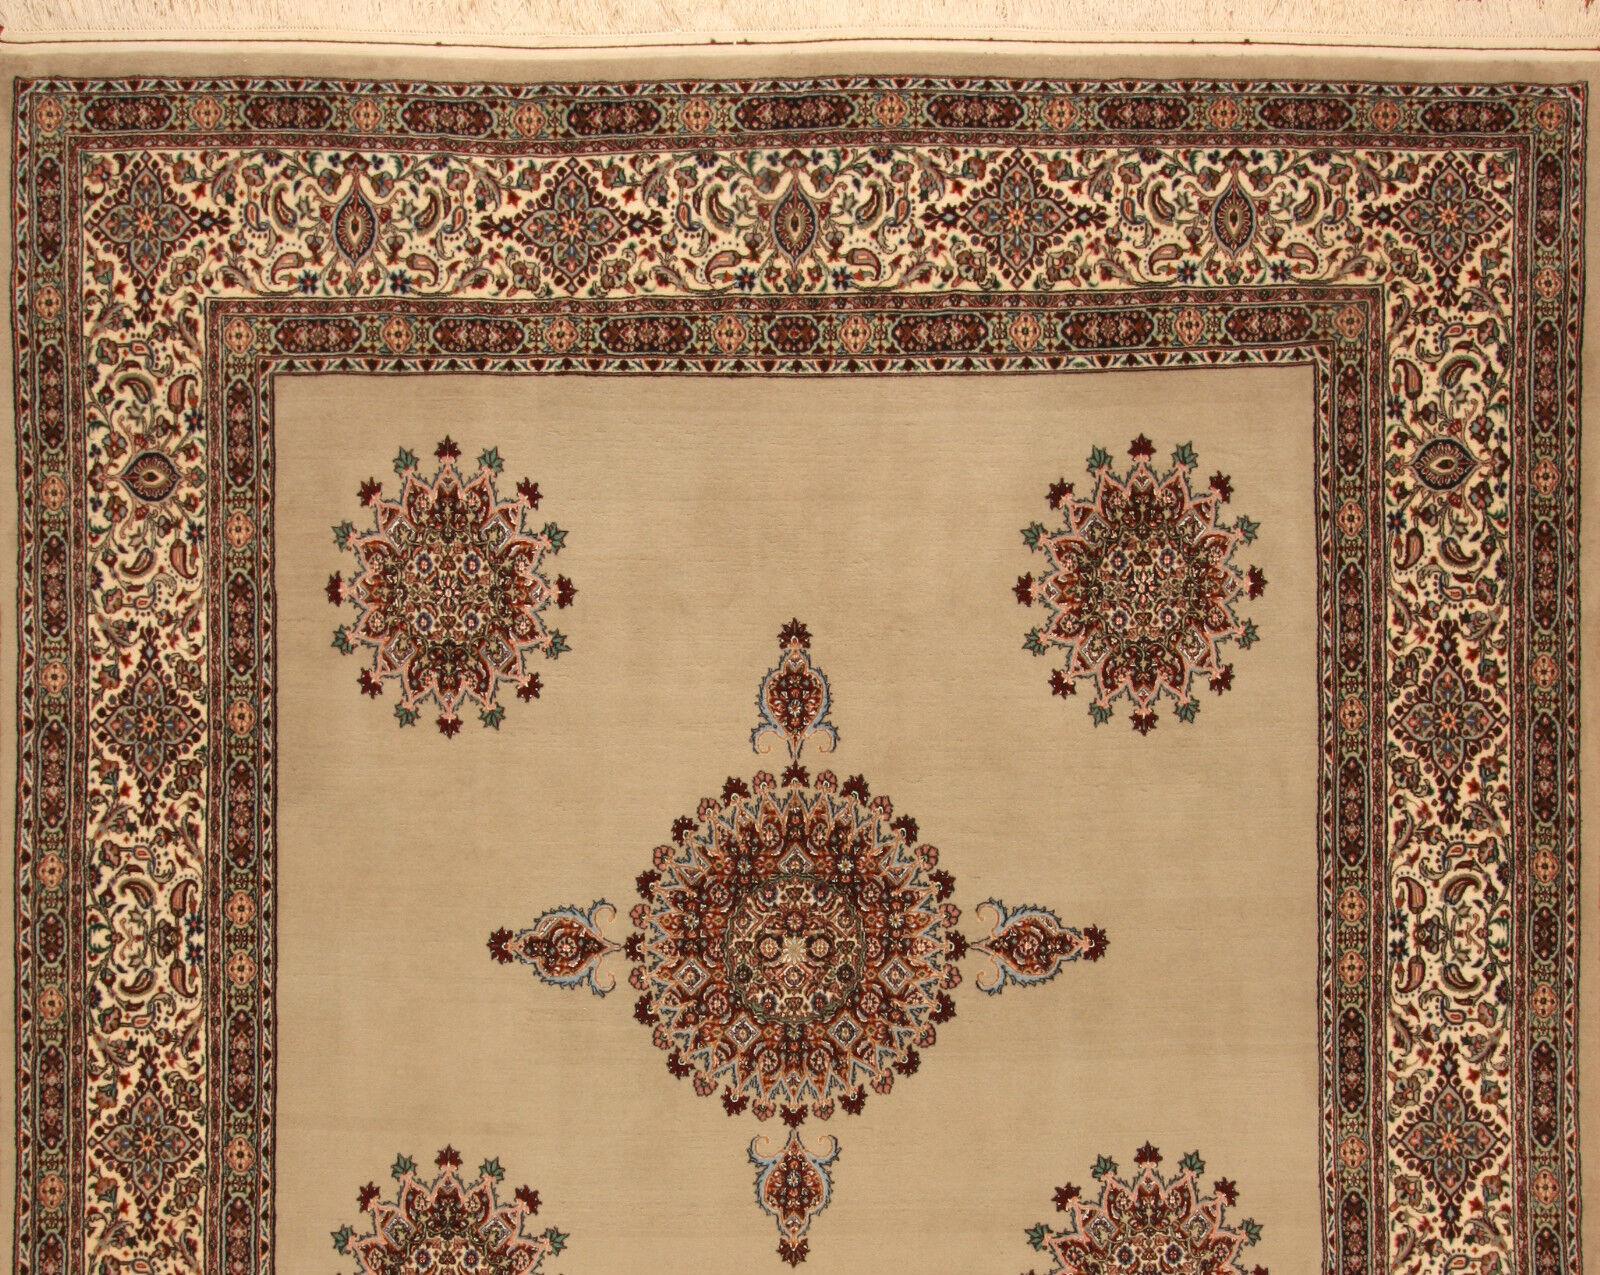 Handmade Vintage Persian Style Isfahan Rug With Silk 8.1' x 8.7', 1990s - 1T48 For Sale 4